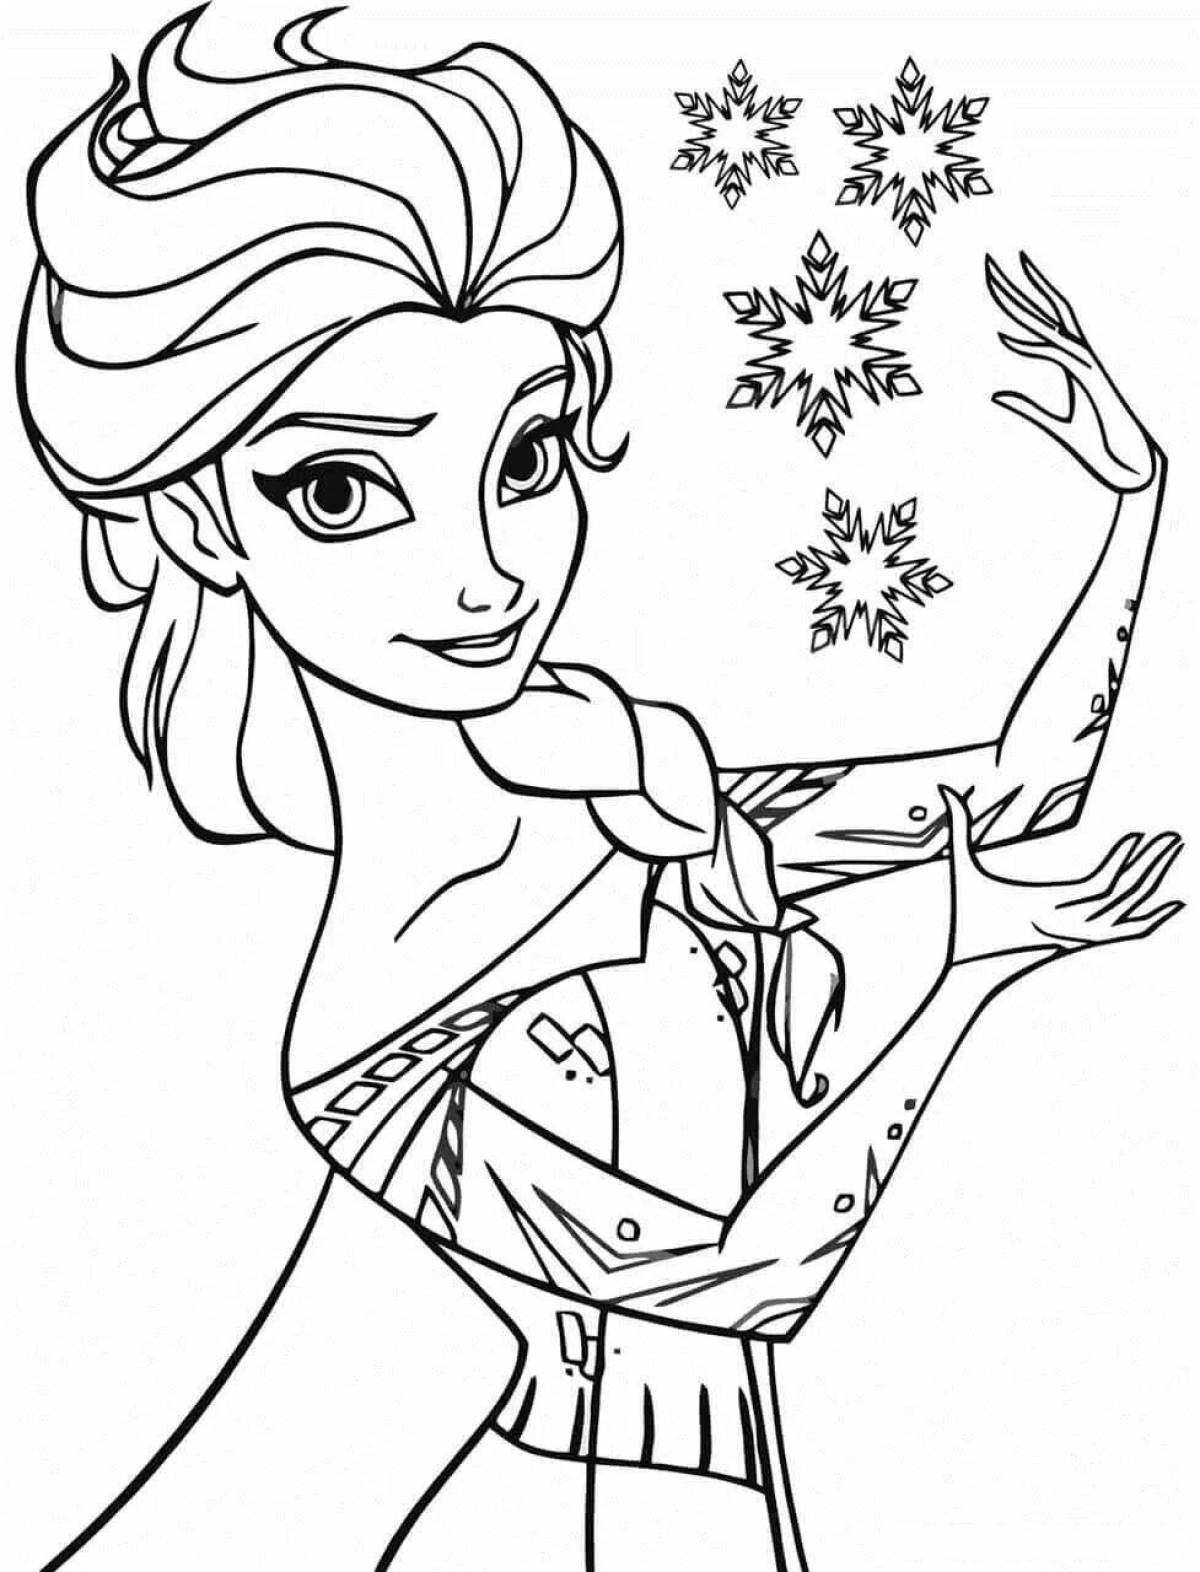 Cute elsa coloring book for kids 4-5 years old